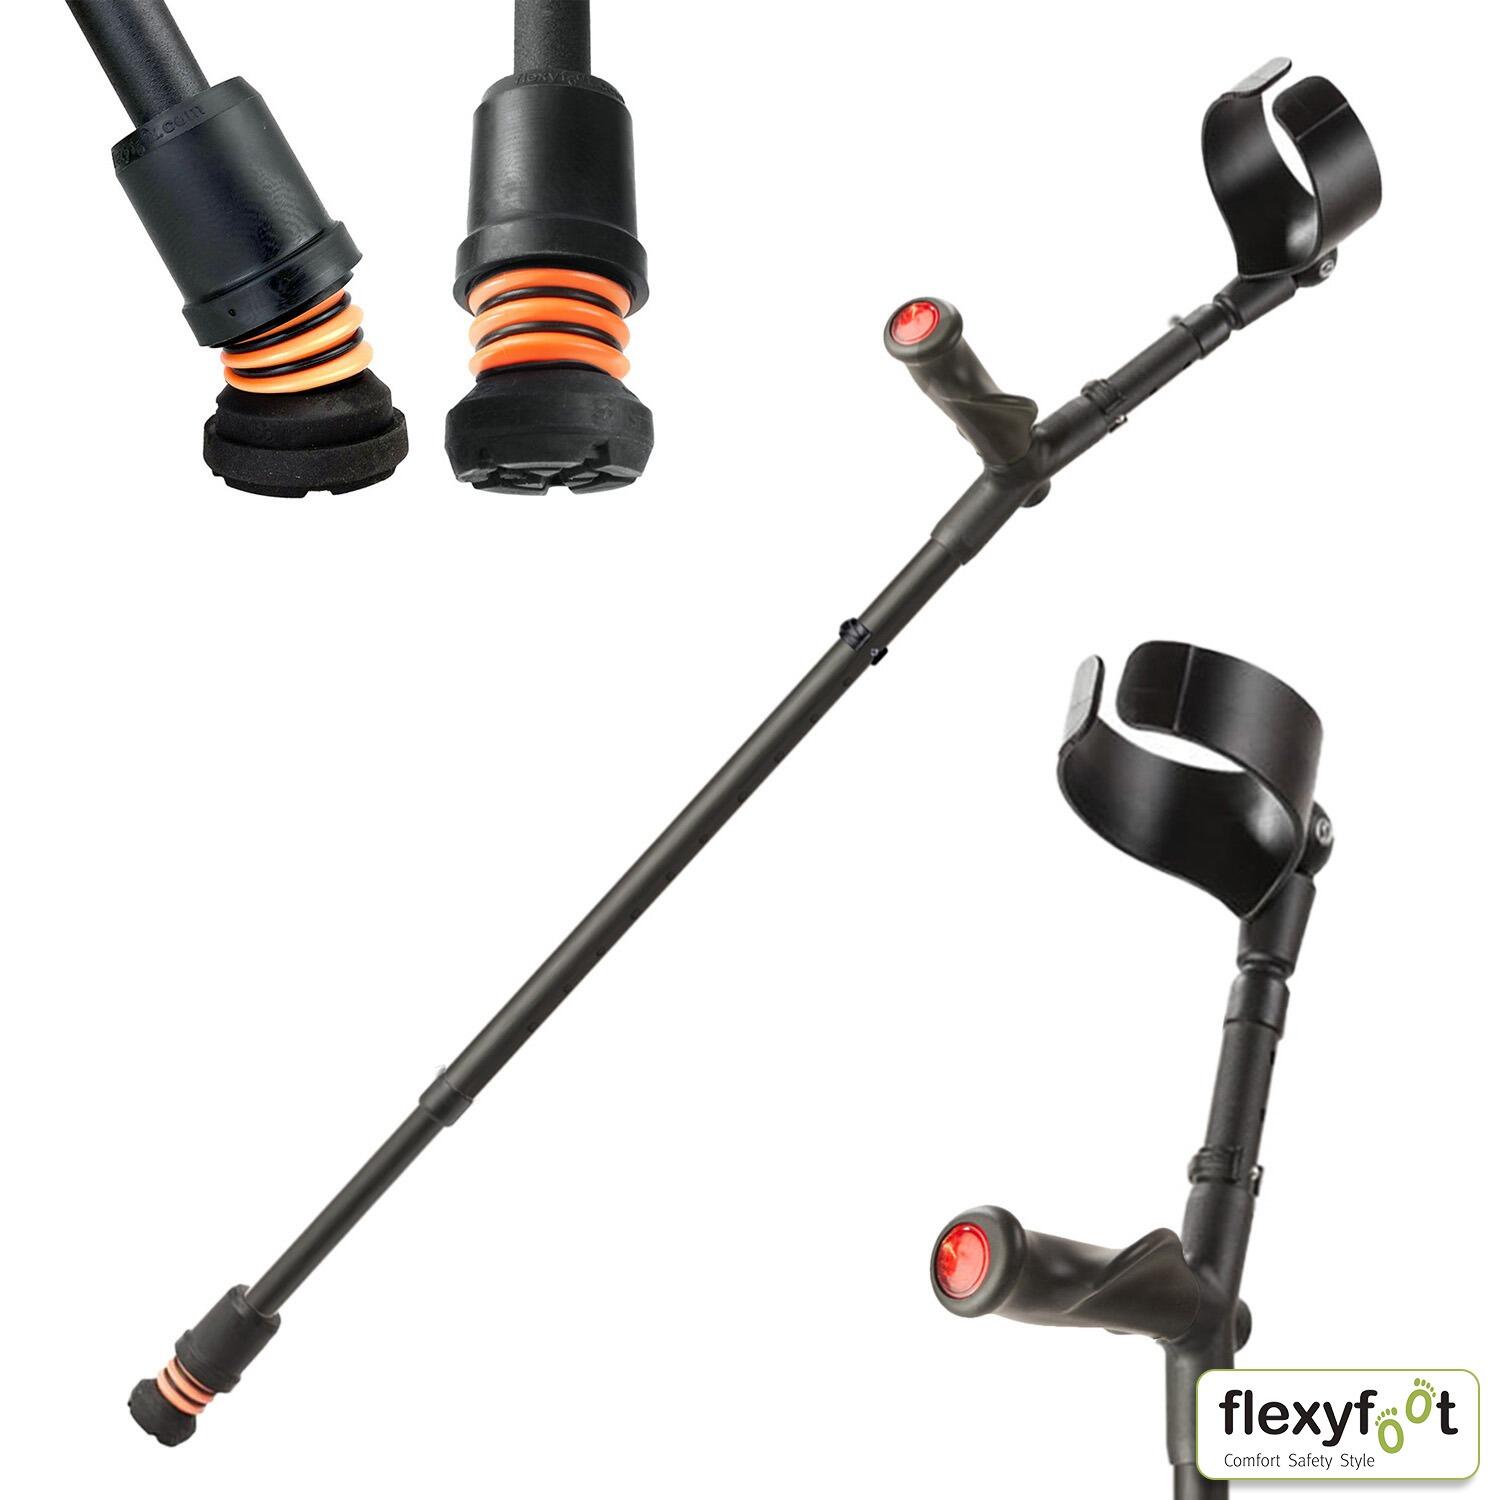 A single right Textured black Flexyfoot Comfort Grip Double Adjustable Crutch